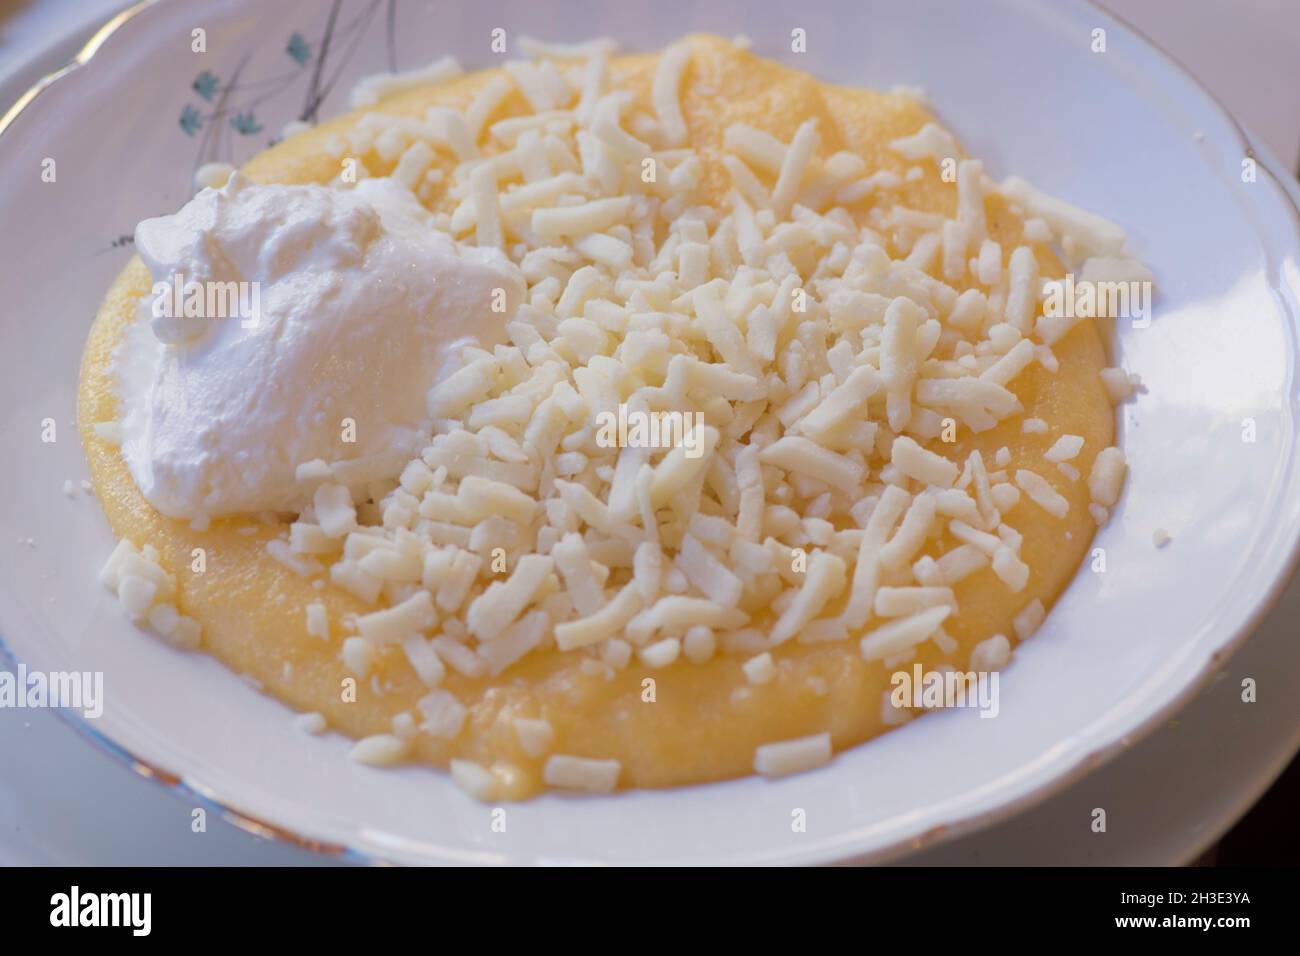 Mamaliga with Cheese, a porridge made out of yellow maize flour, traditional in Romania, Moldova and West Ukraine Stock Photo